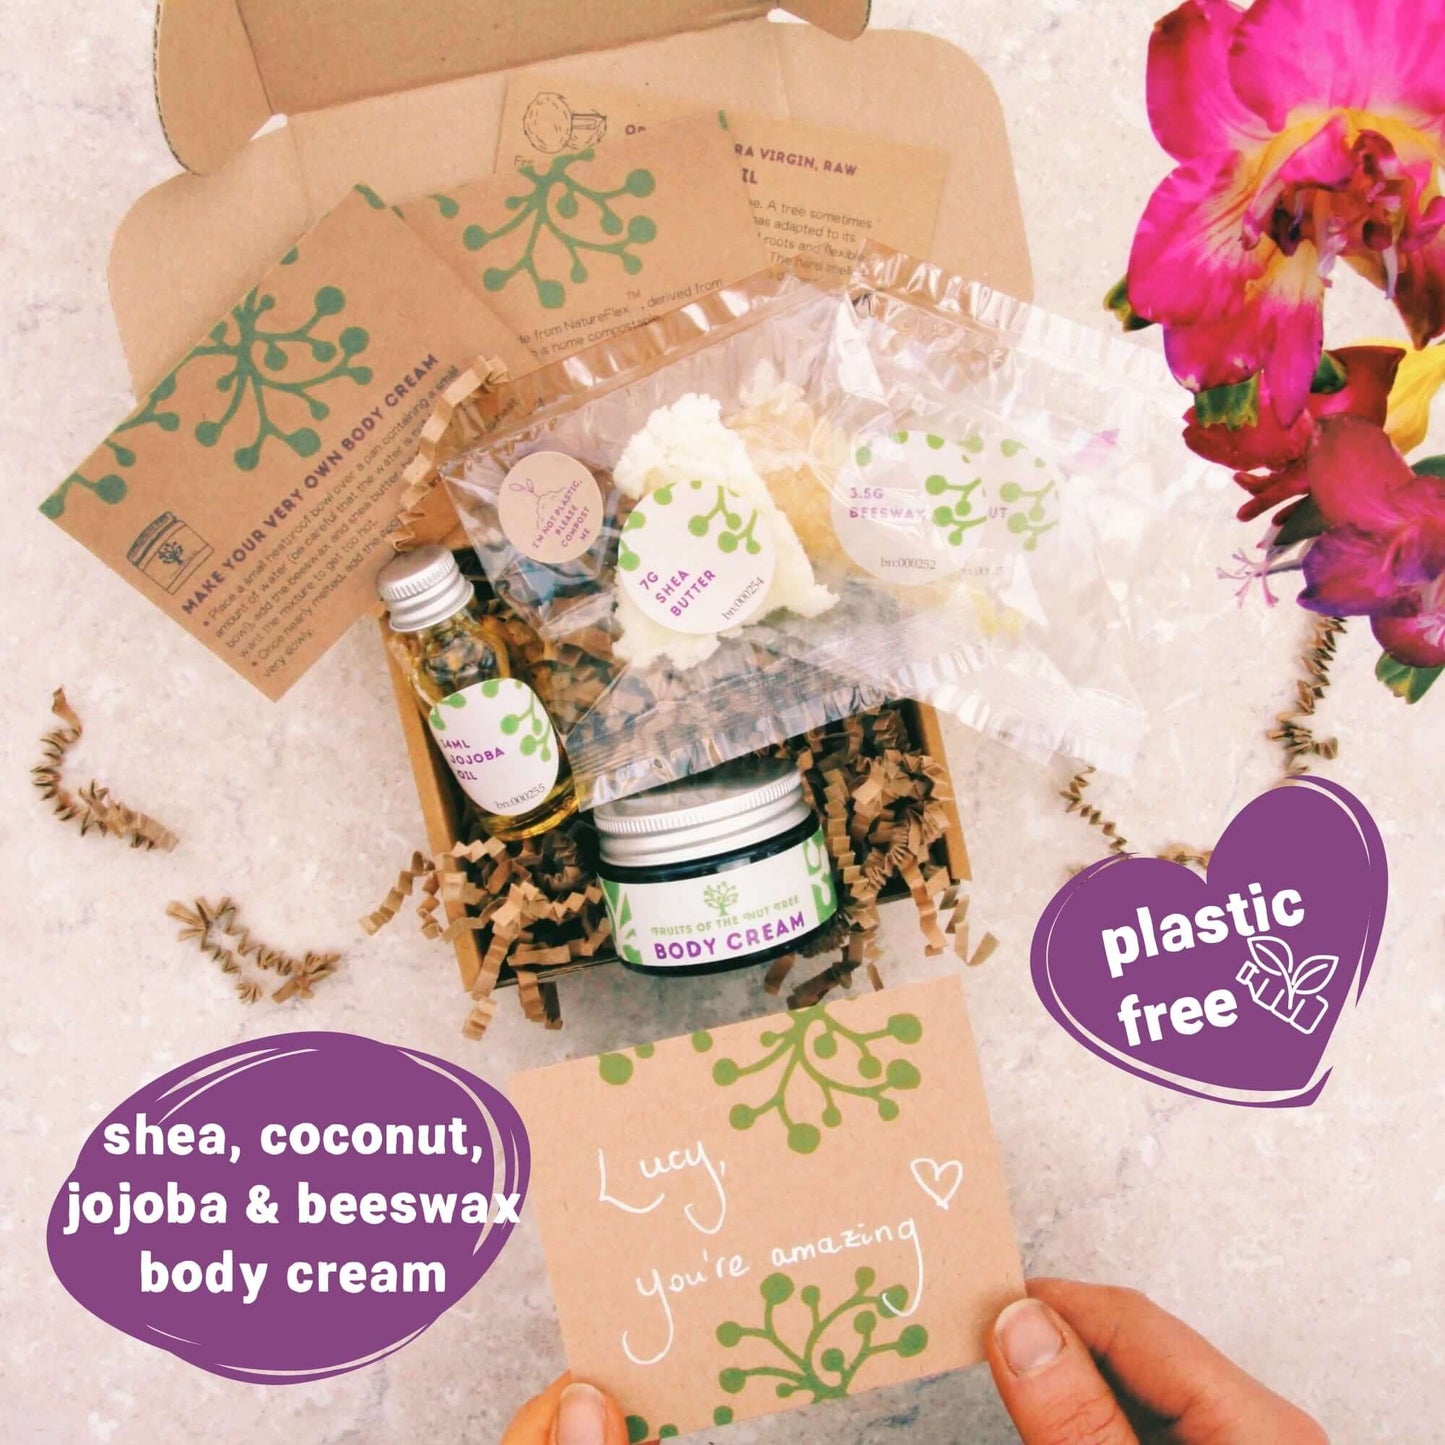 organic skincare kit ingredients packaged in eco-friendly plastic free packaging inside 30th birthday gift box